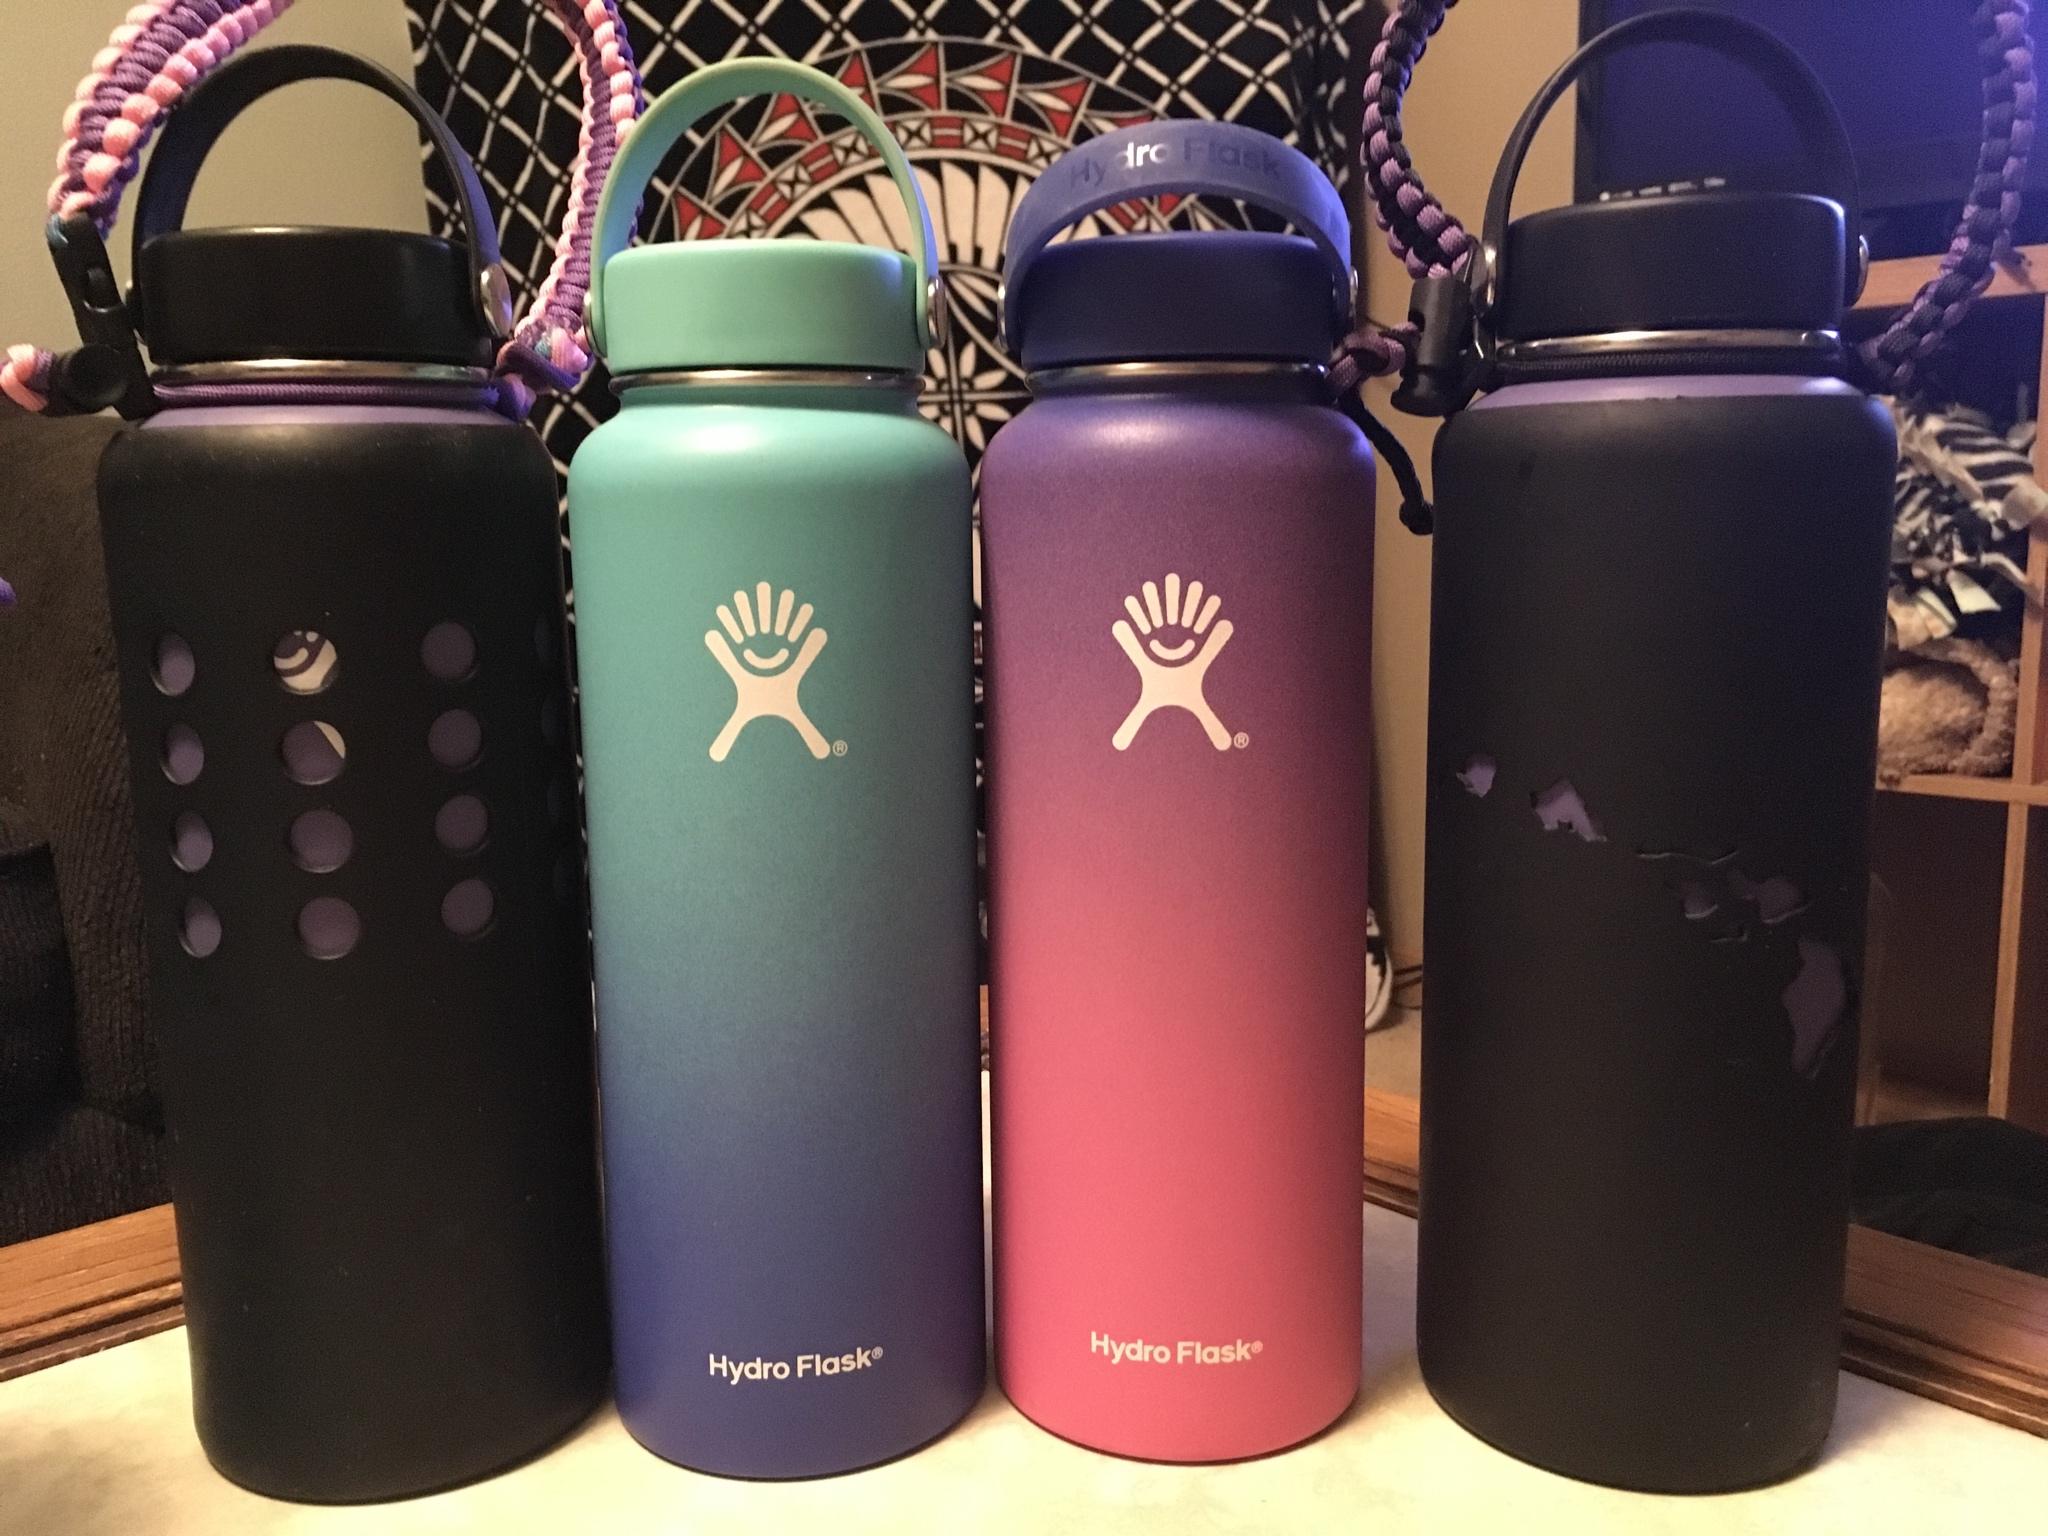 My Hydro Flask collection!